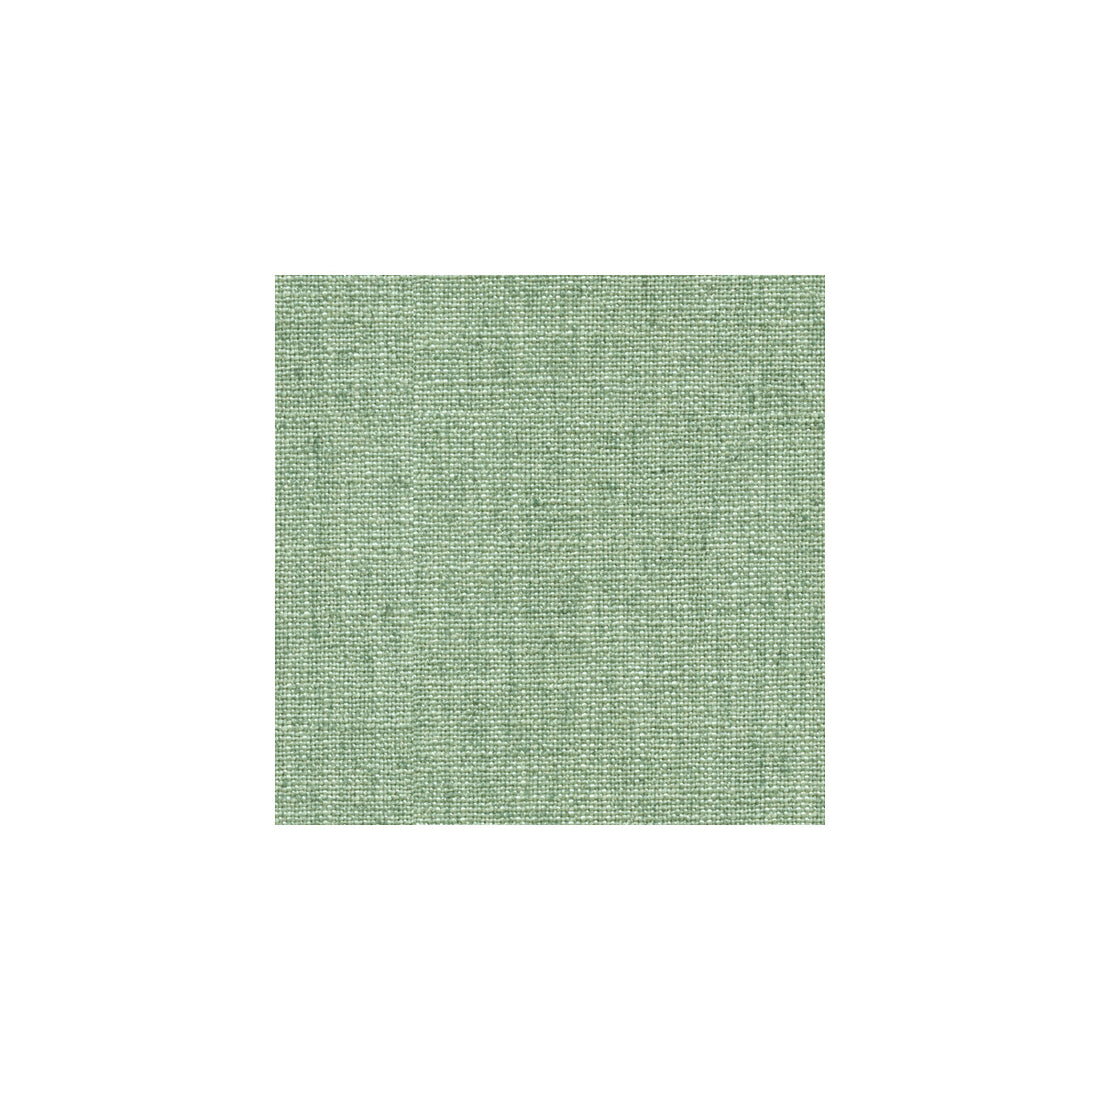 Denman fabric in pool color - pattern 33008.35.0 - by Kravet Basics in the Sarah Richardson Affinity collection